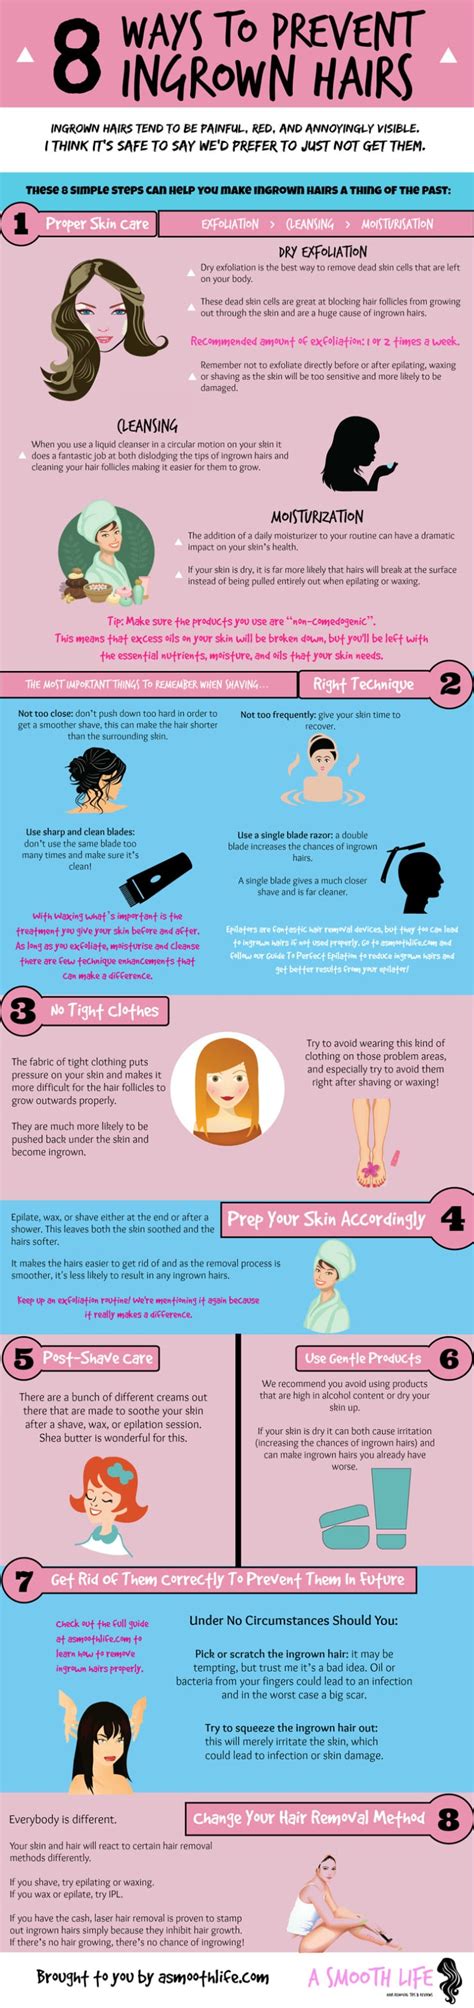 8 Ways To Prevent Ingrown Hairs An Infographic